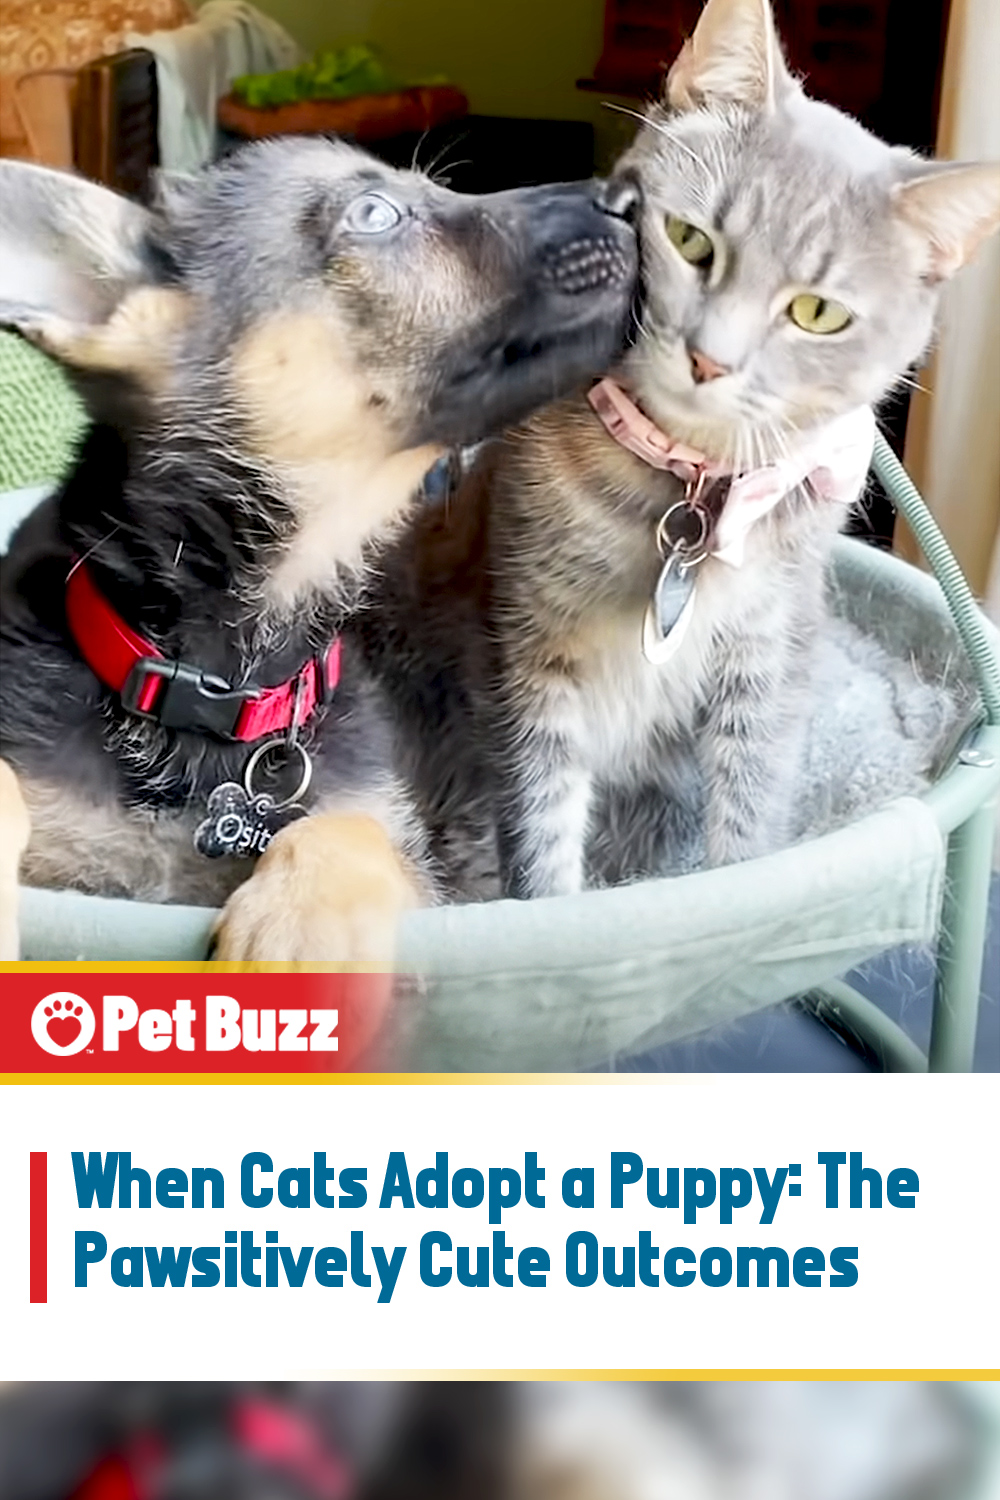 When Cats Adopt a Puppy: The Pawsitively Cute Outcomes